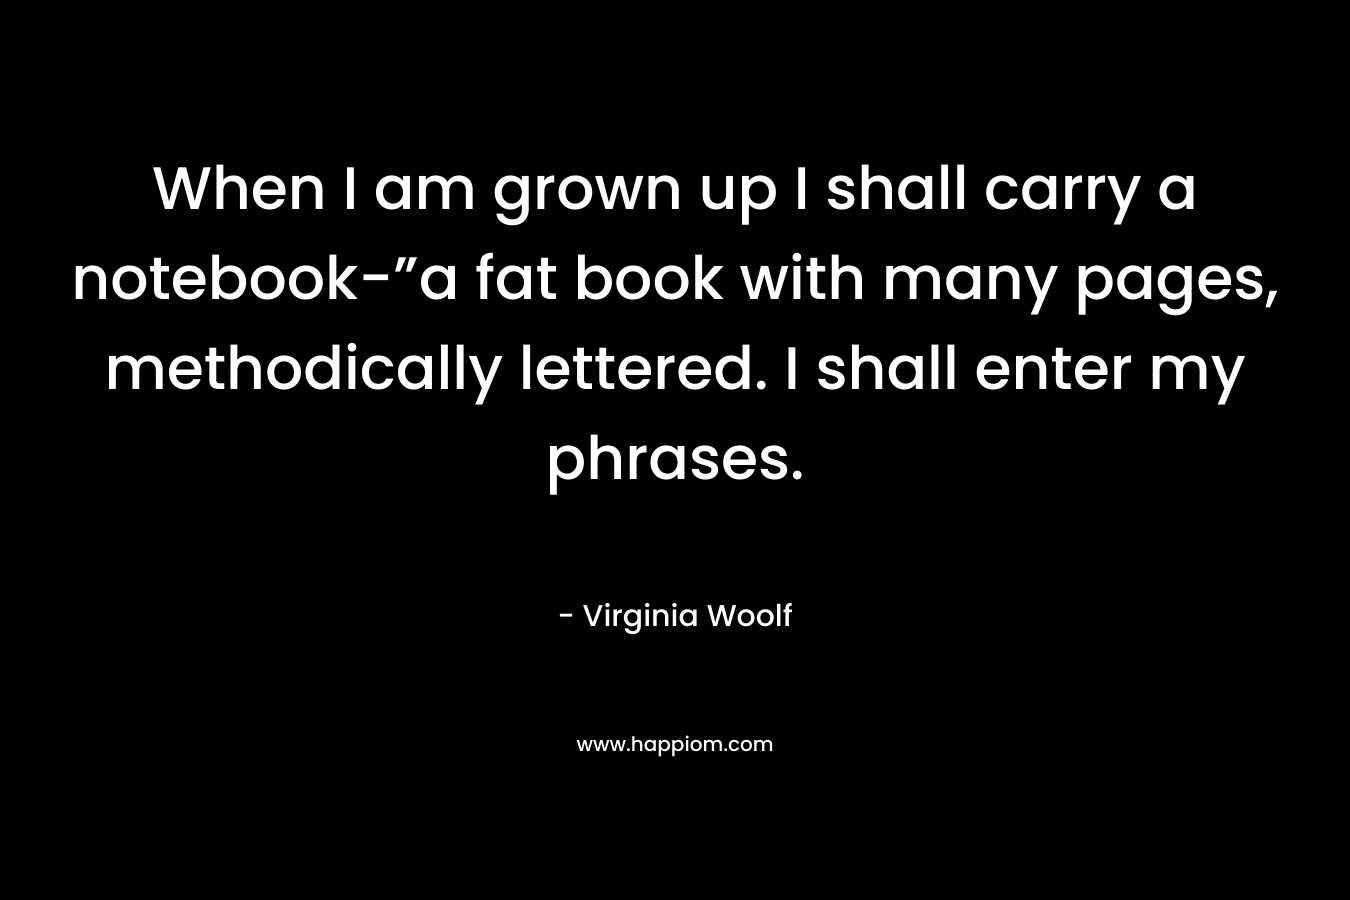 When I am grown up I shall carry a notebook-”a fat book with many pages, methodically lettered. I shall enter my phrases. – Virginia Woolf